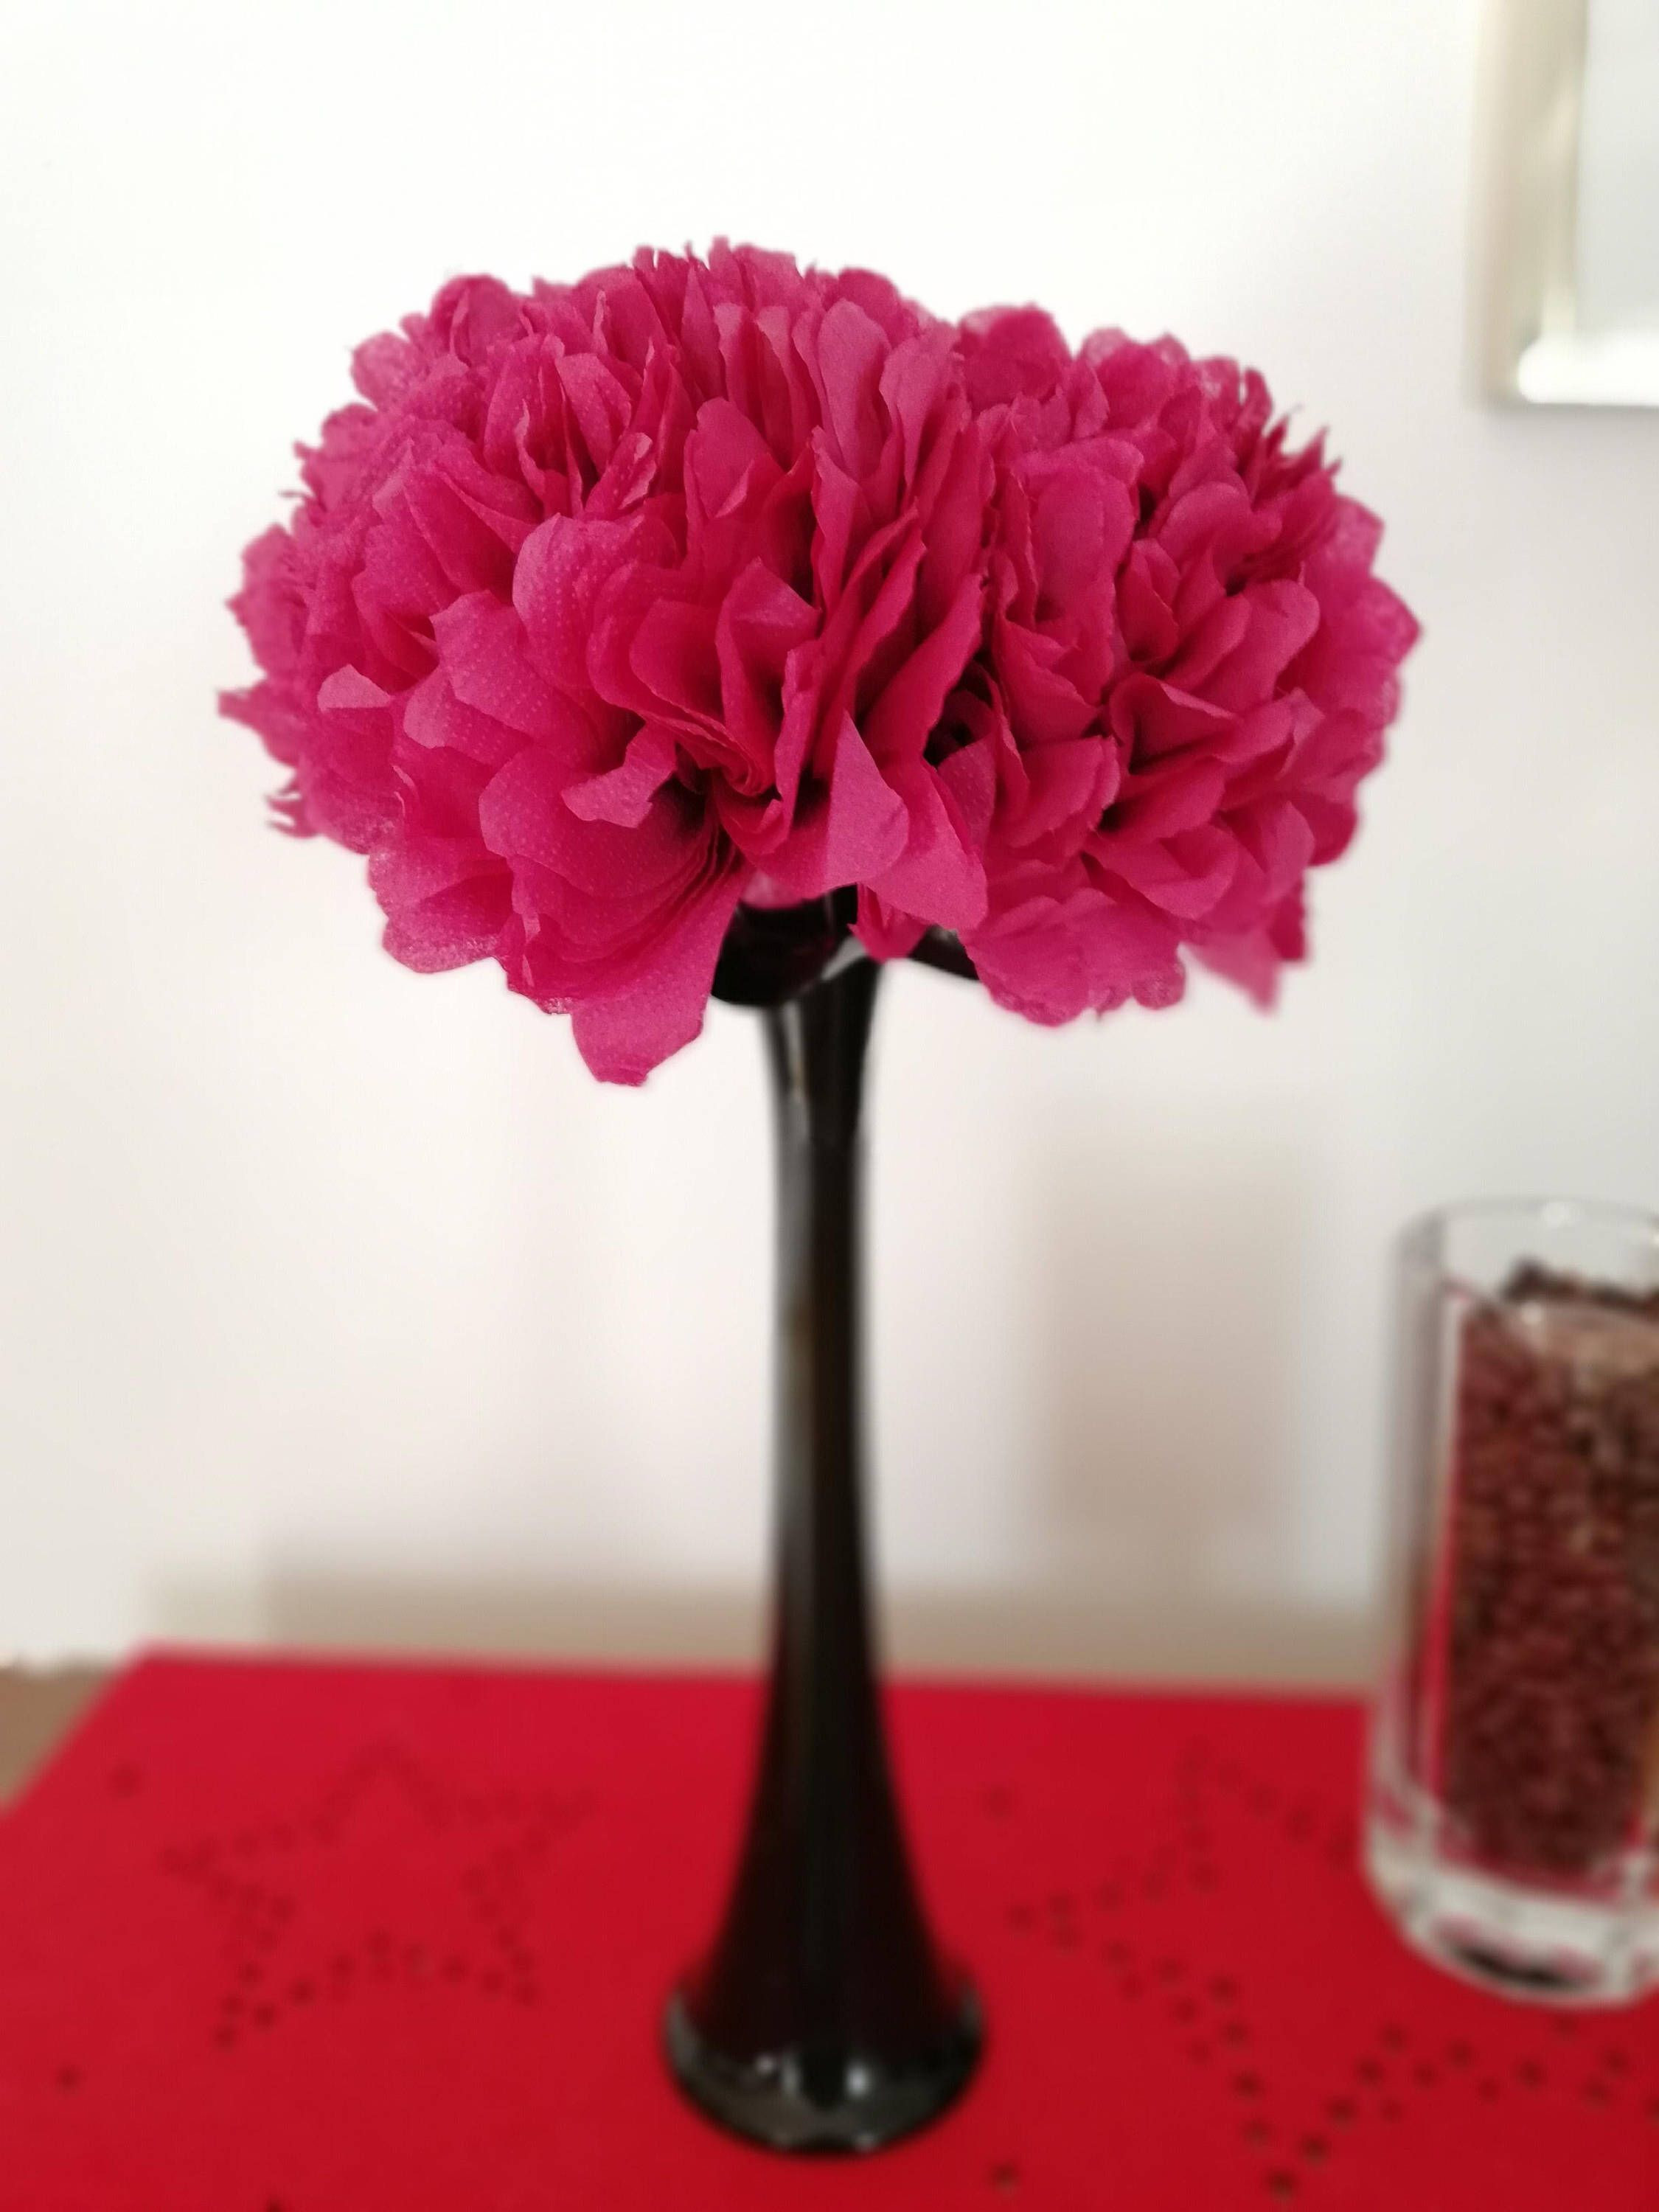 24 Stylish Red Flowers In Vase 2024 free download red flowers in vase of paper flowers set of 5 flowers in a vase hanging flowers paper inside paper flowers set of 5 flowers in a vase hanging flowers paper balls